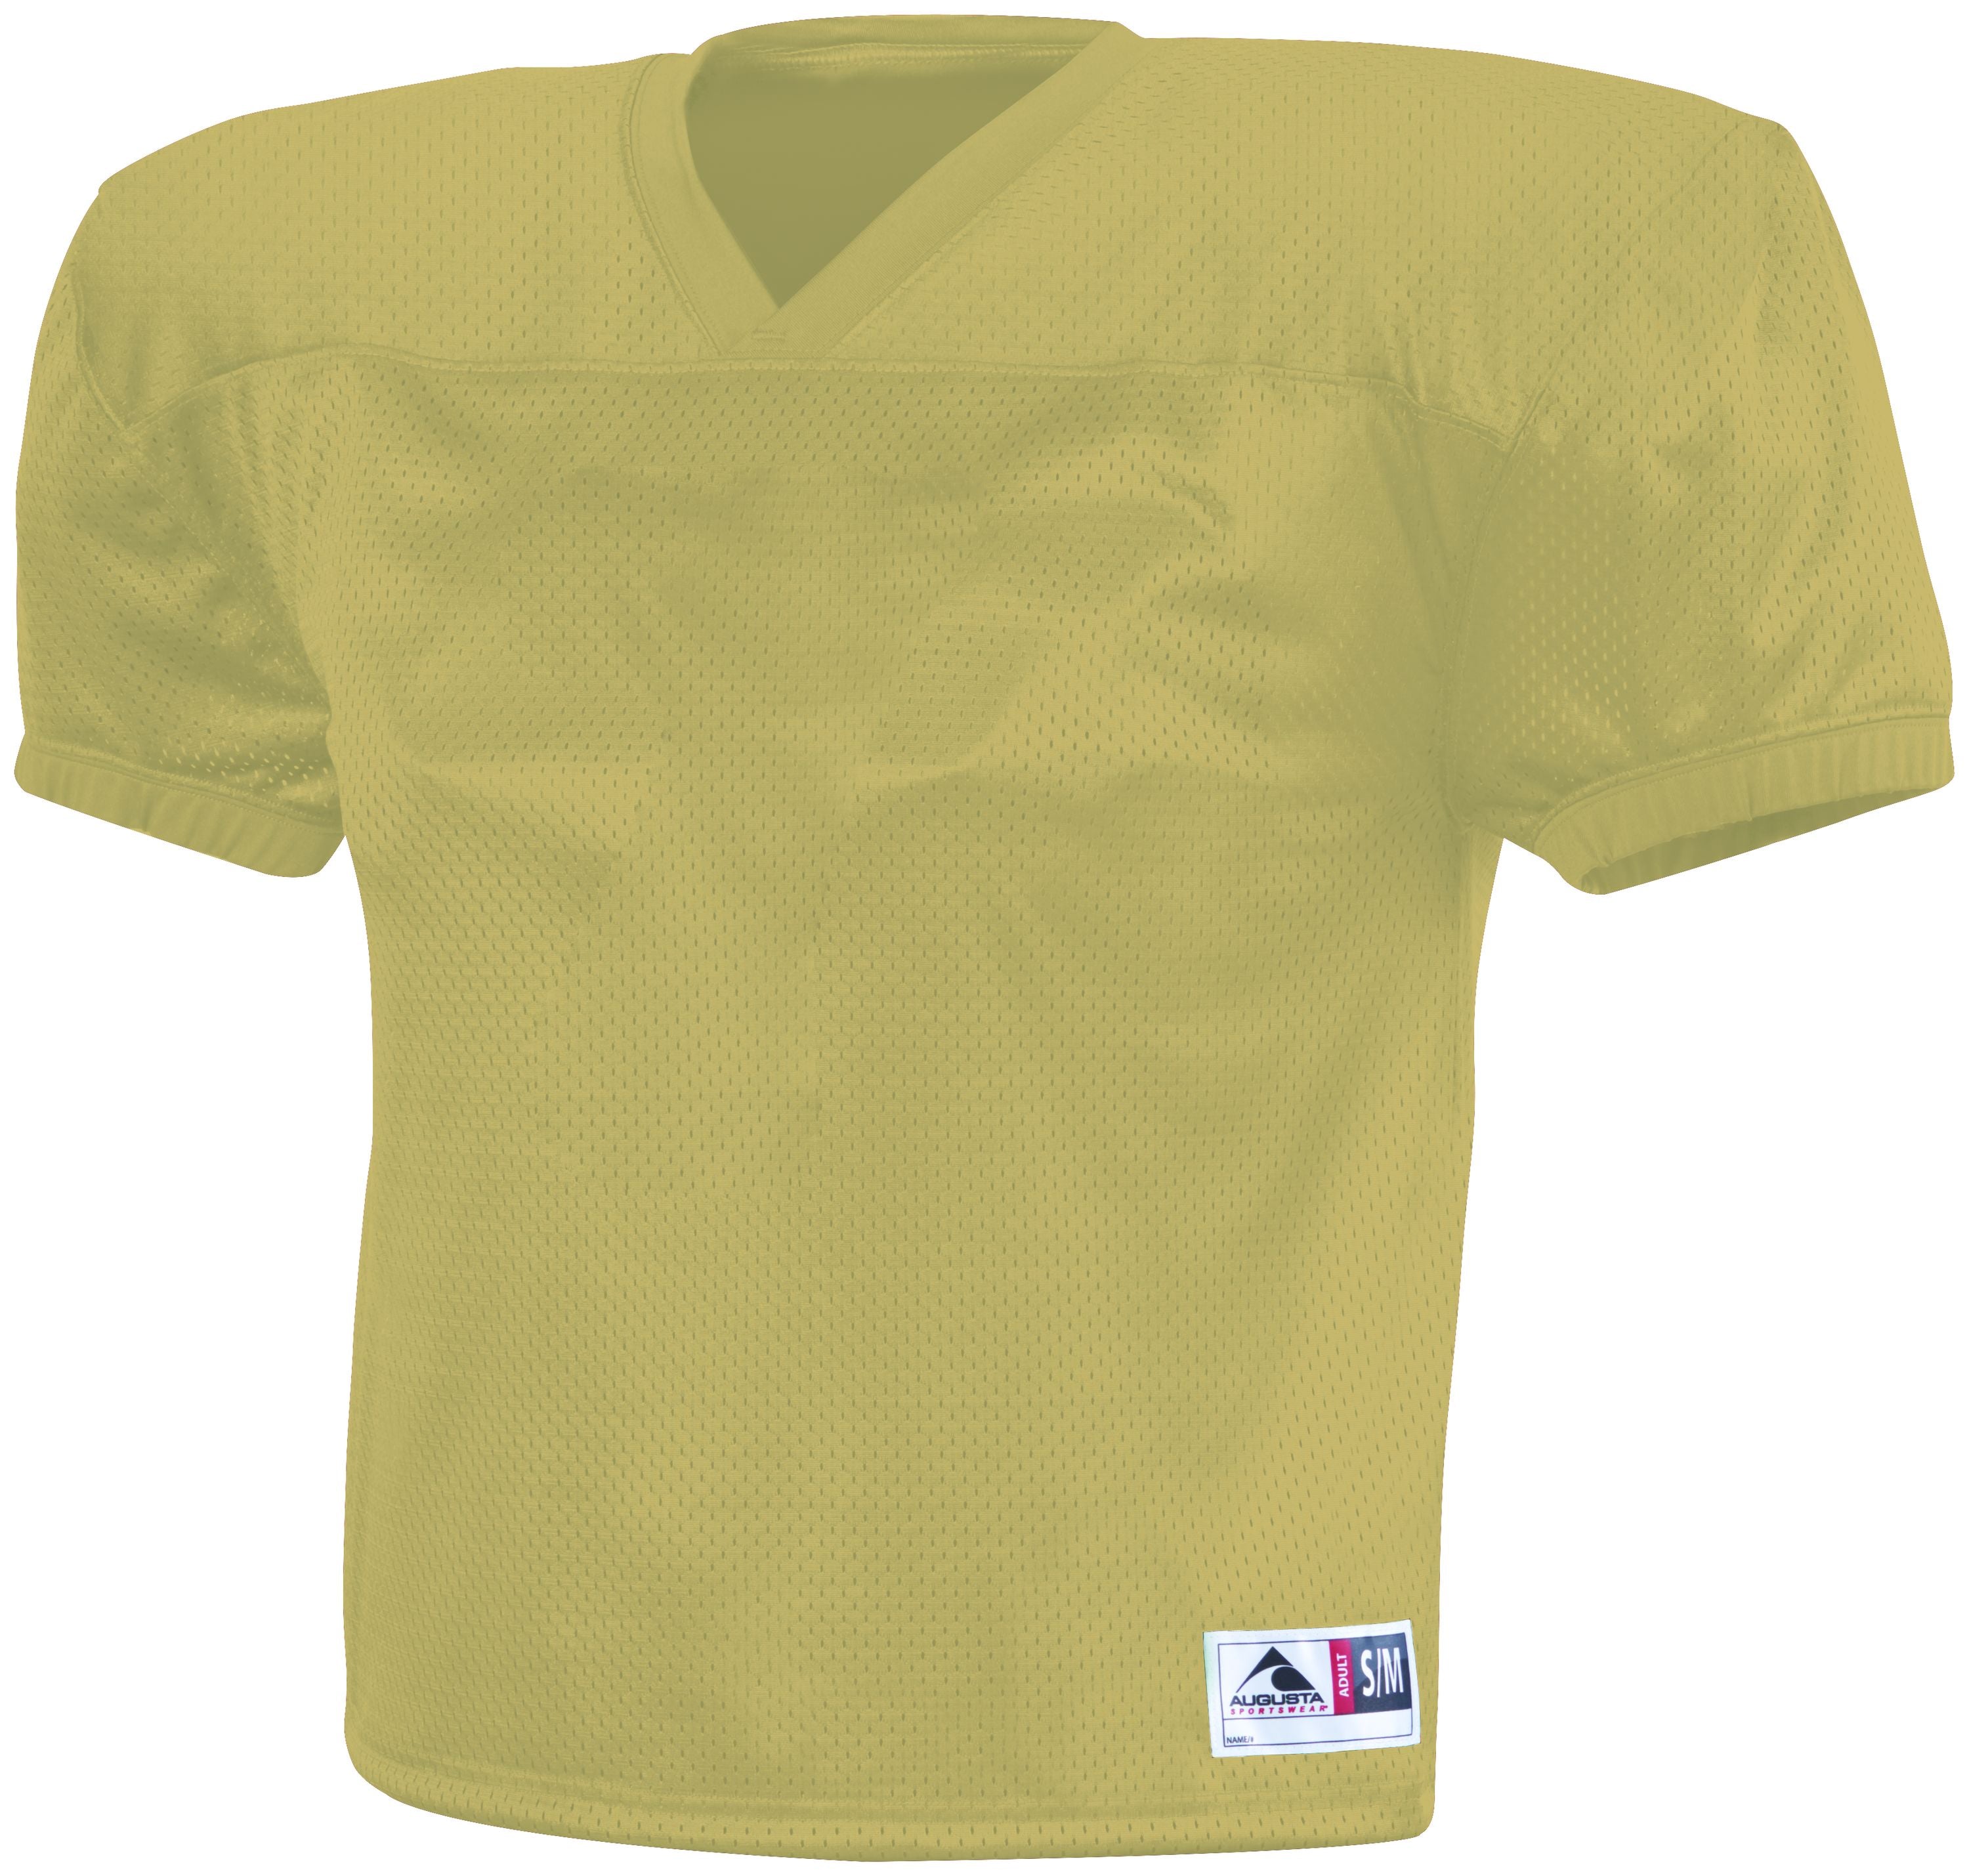 Augusta Sportswear Dash Practice Jersey in Vegas Gold  -Part of the Adult, Adult-Jersey, Augusta-Products, Football, Shirts, All-Sports, All-Sports-1 product lines at KanaleyCreations.com